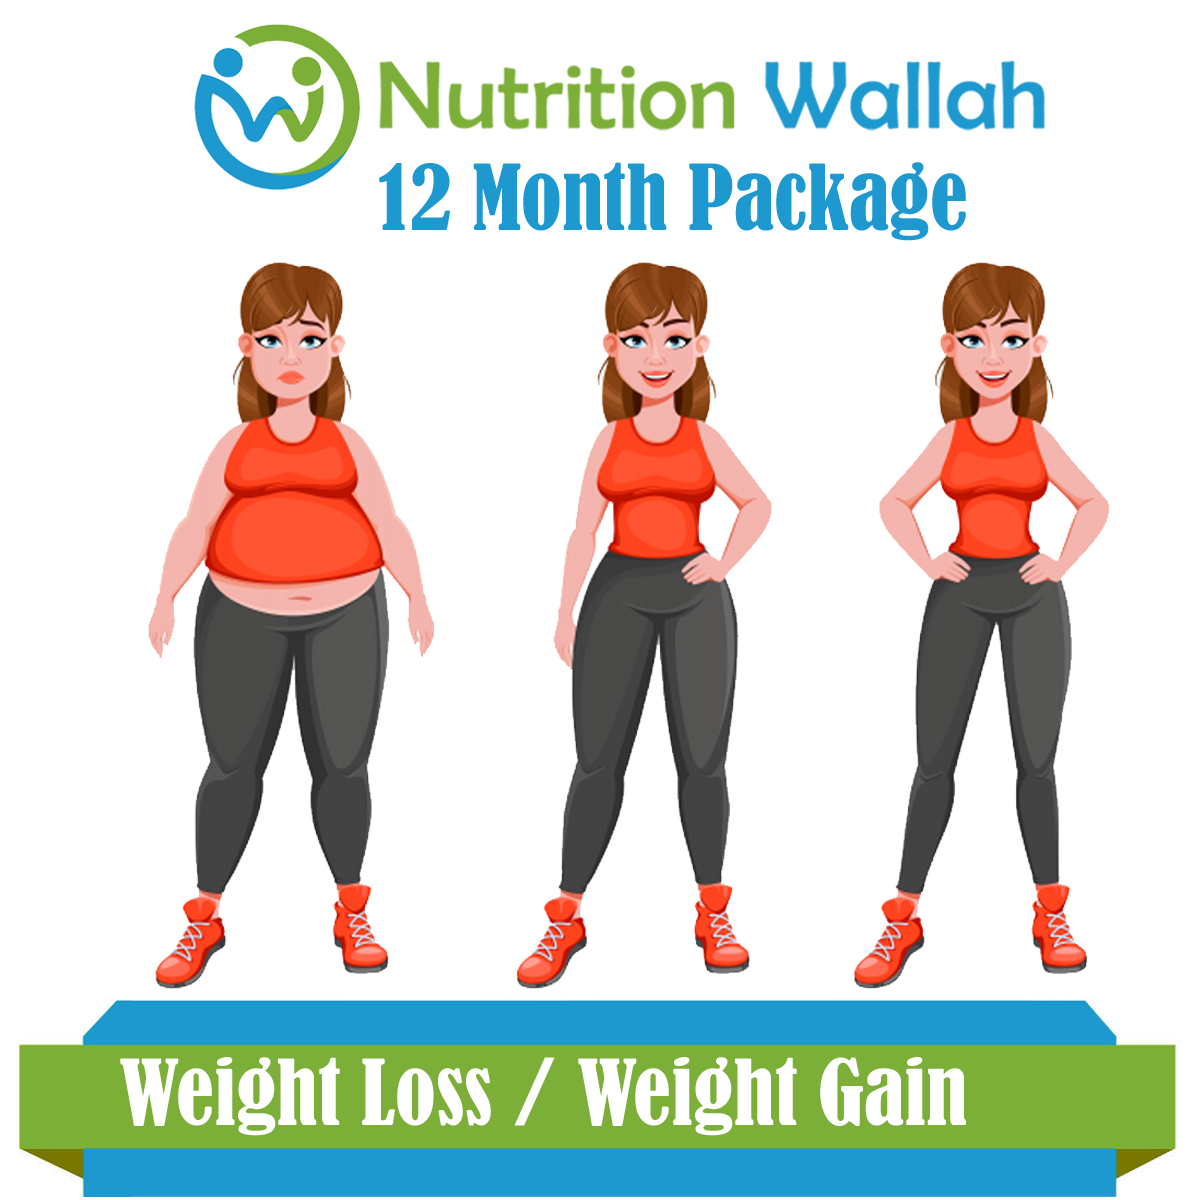 12 Month Package Weight Loss or Weight Gain
